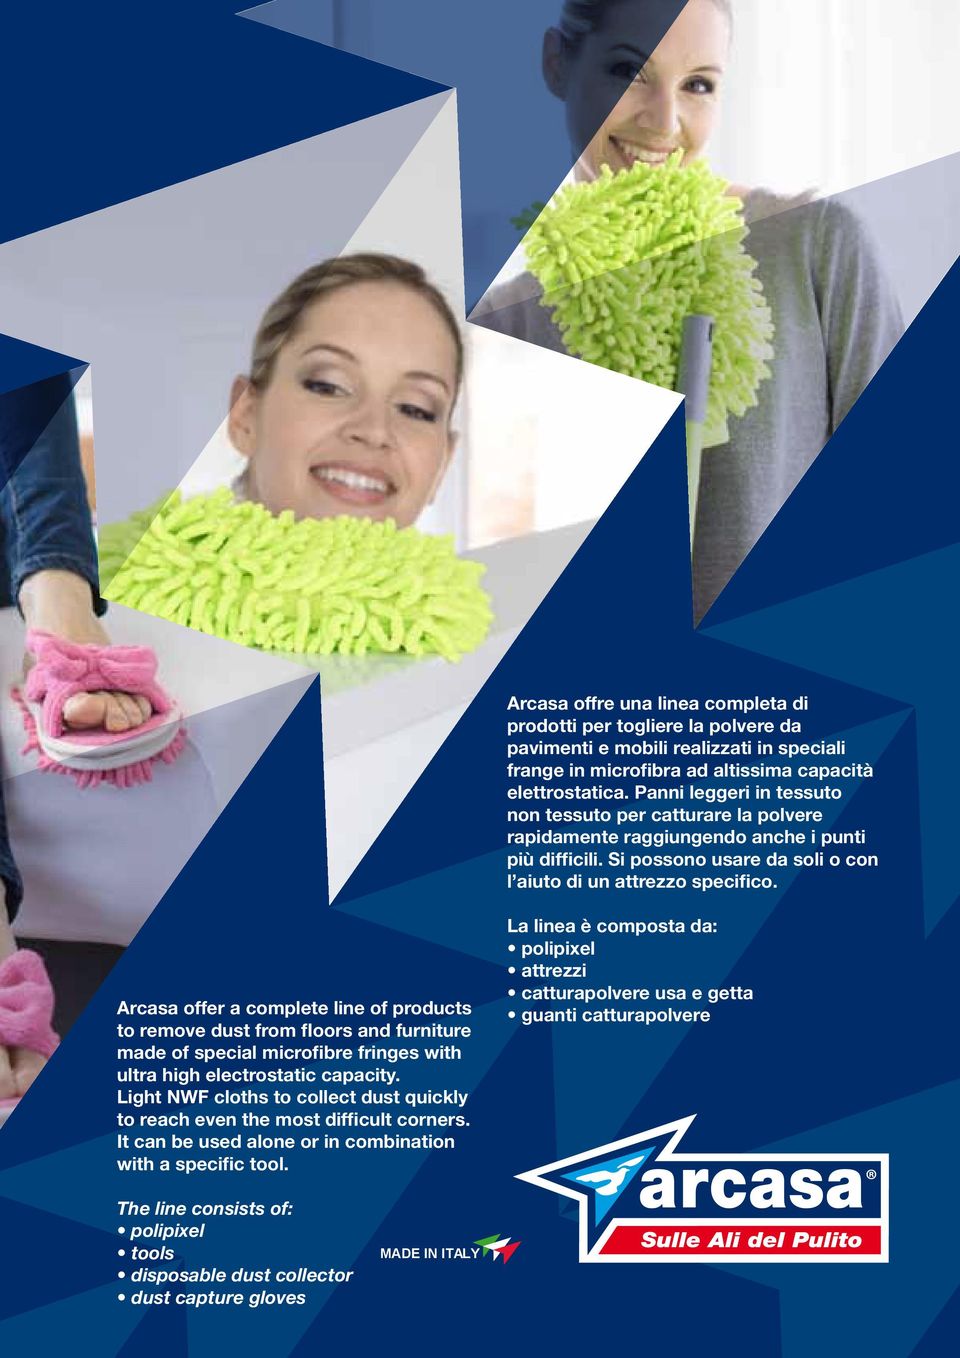 Arcasa offer a complete line of products to remove dust from floors and furniture made of special microfibre fringes with ultra high electrostatic capacity.